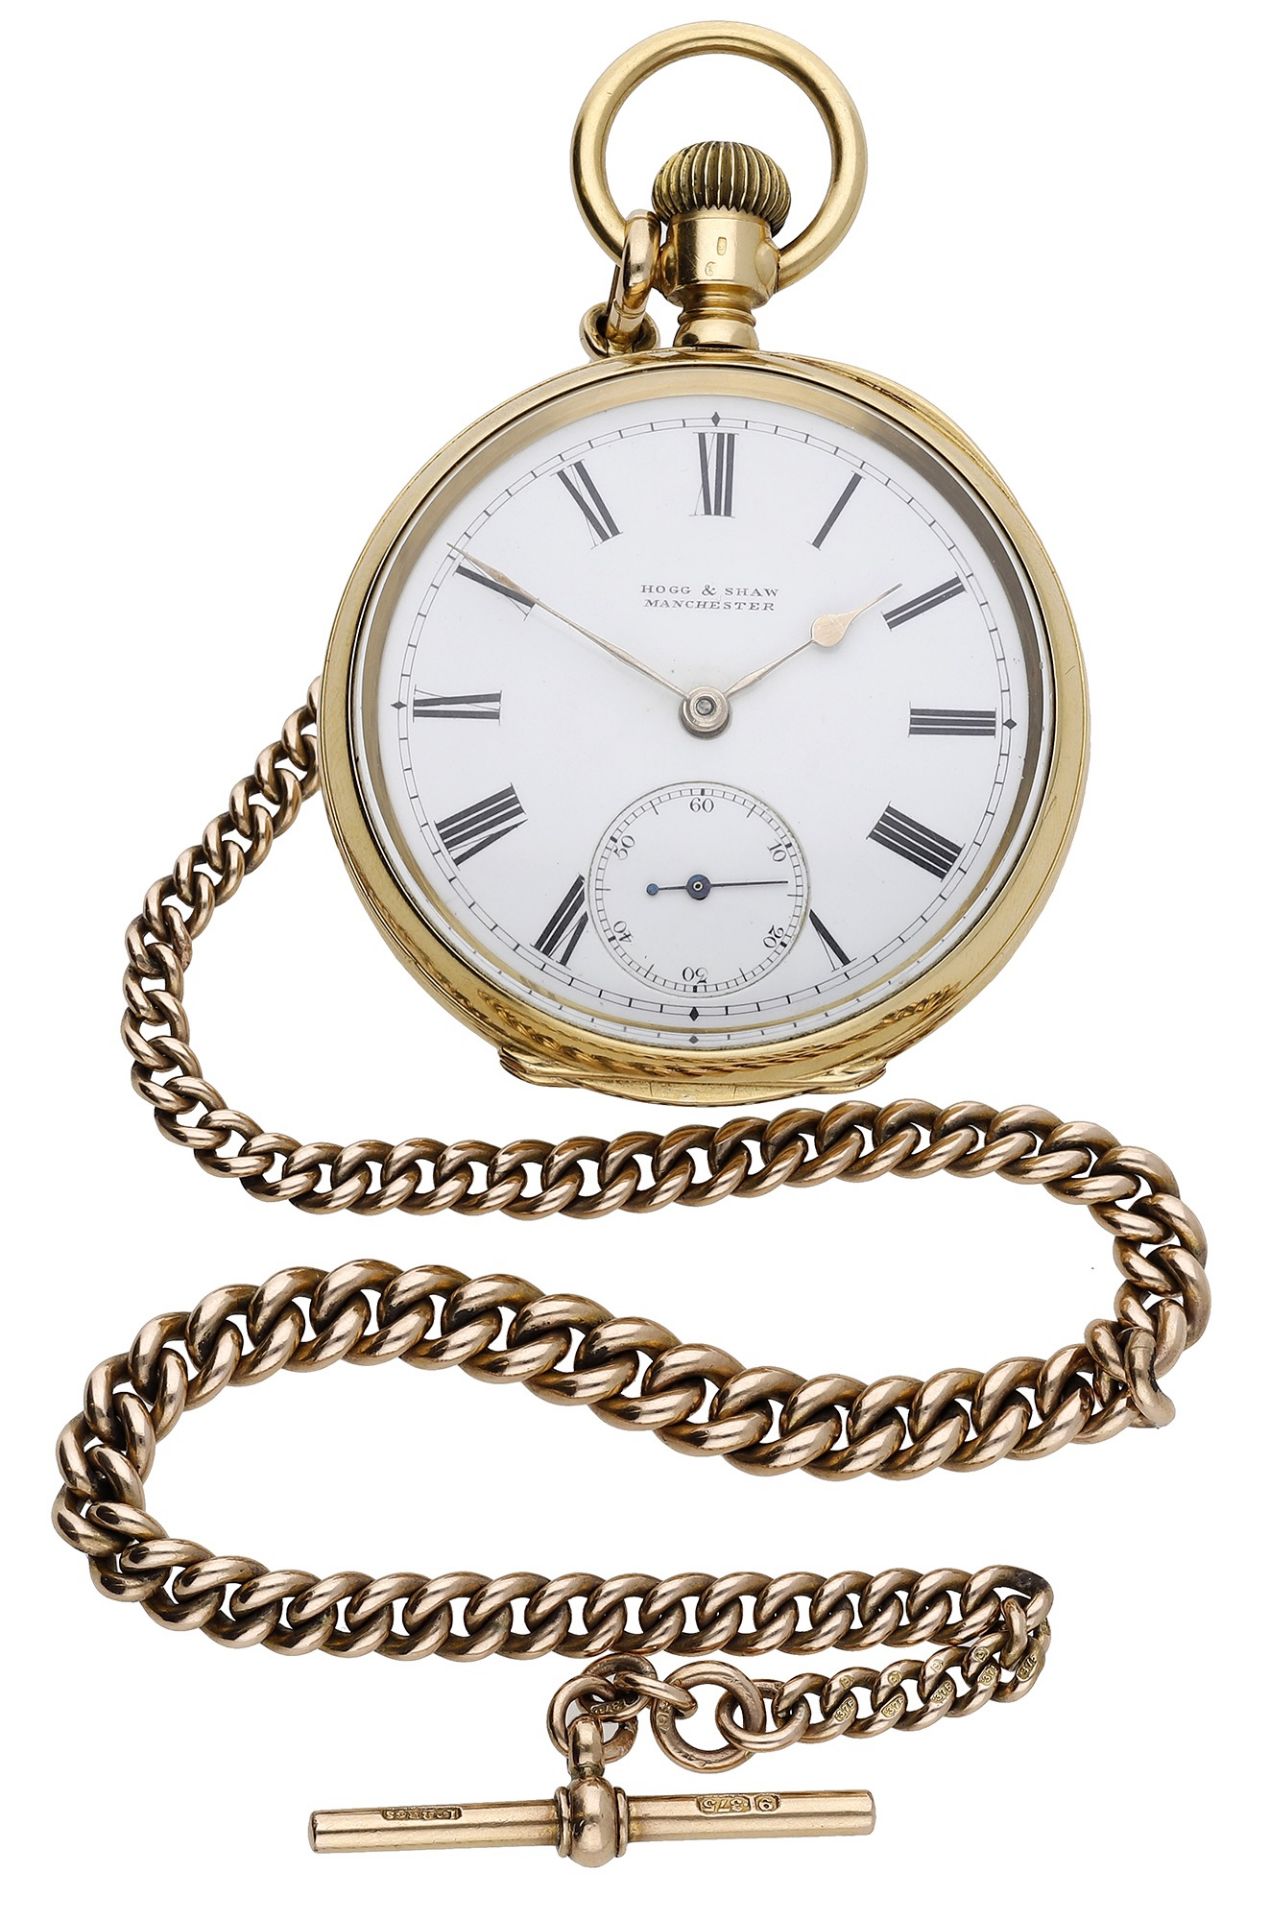 Waltham. Retailed by Hogg & Shaw, Manchester. A gold open-faced keyless watch with gold Albe...